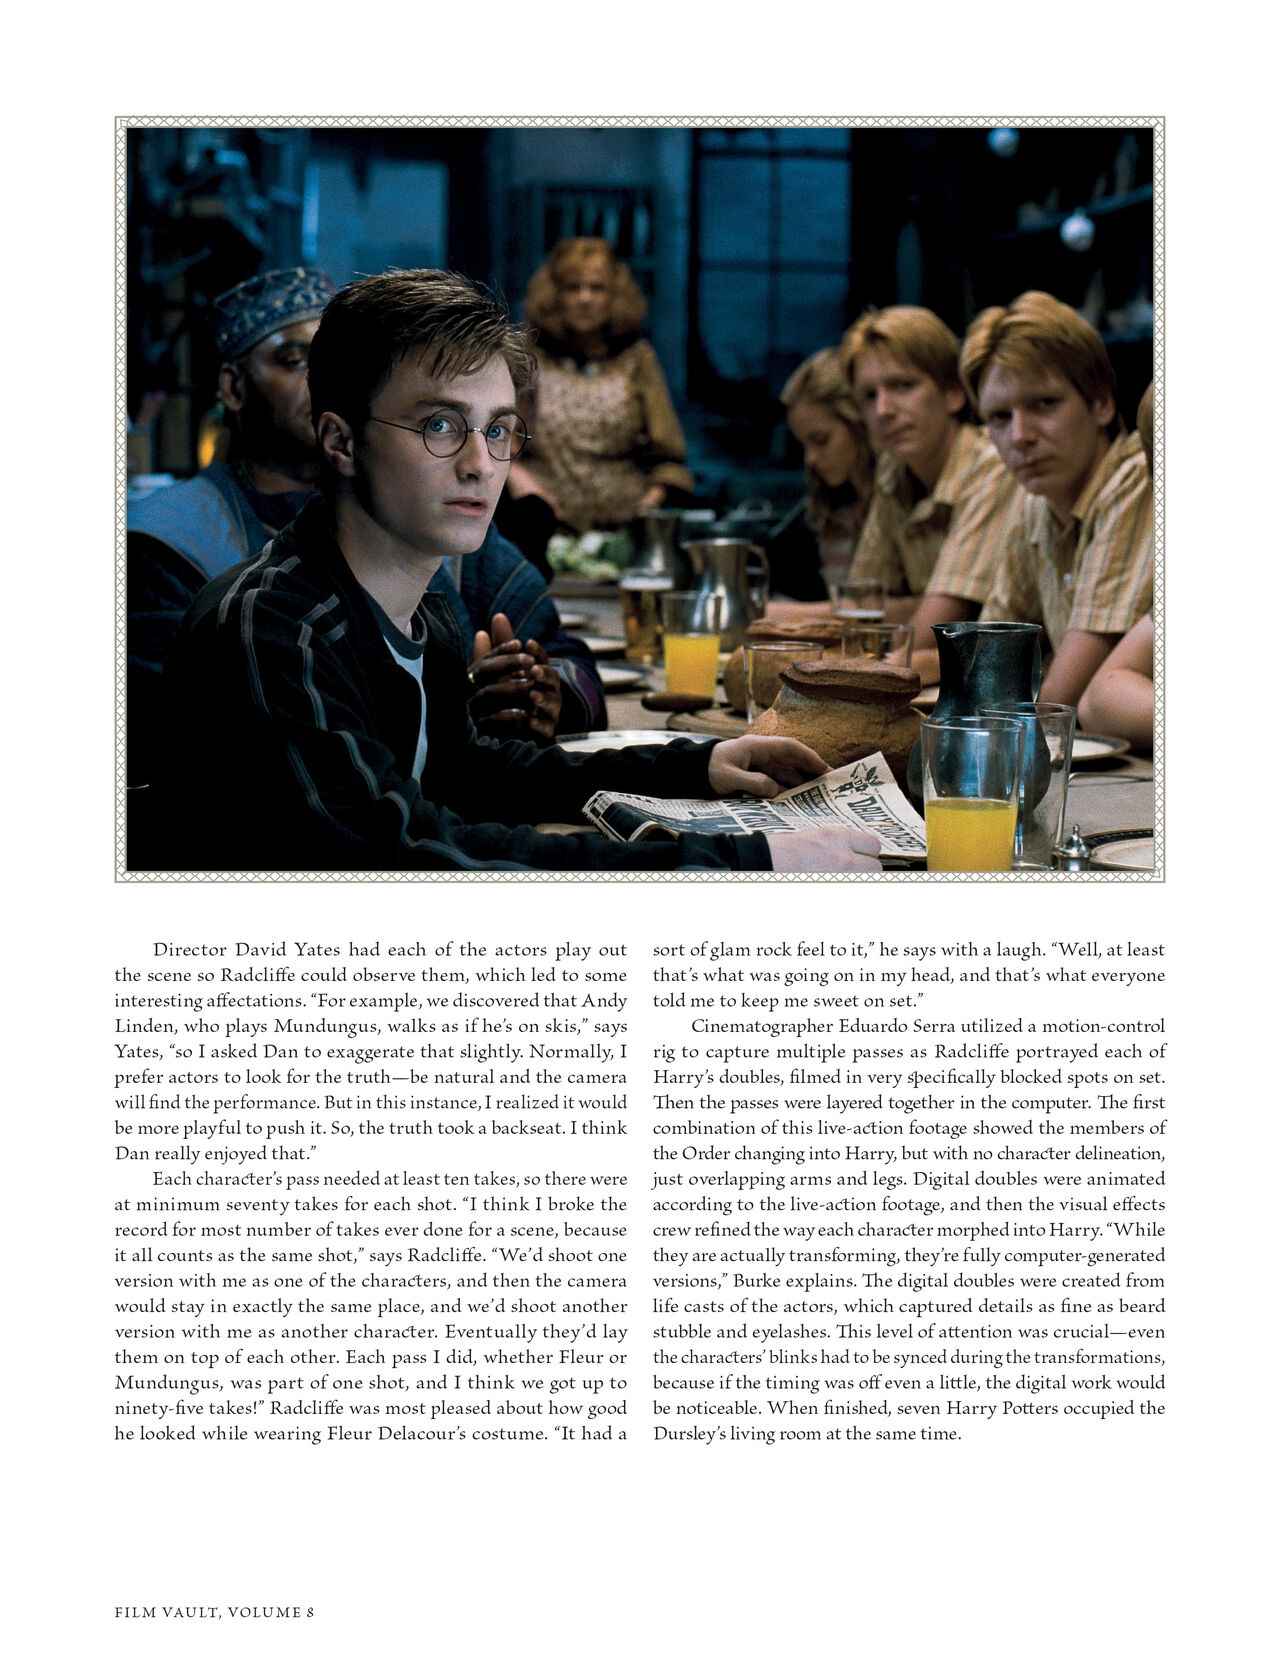 Harry Potter - Film Vault v08 - The Order of the Phoenix and Dark Forces 34